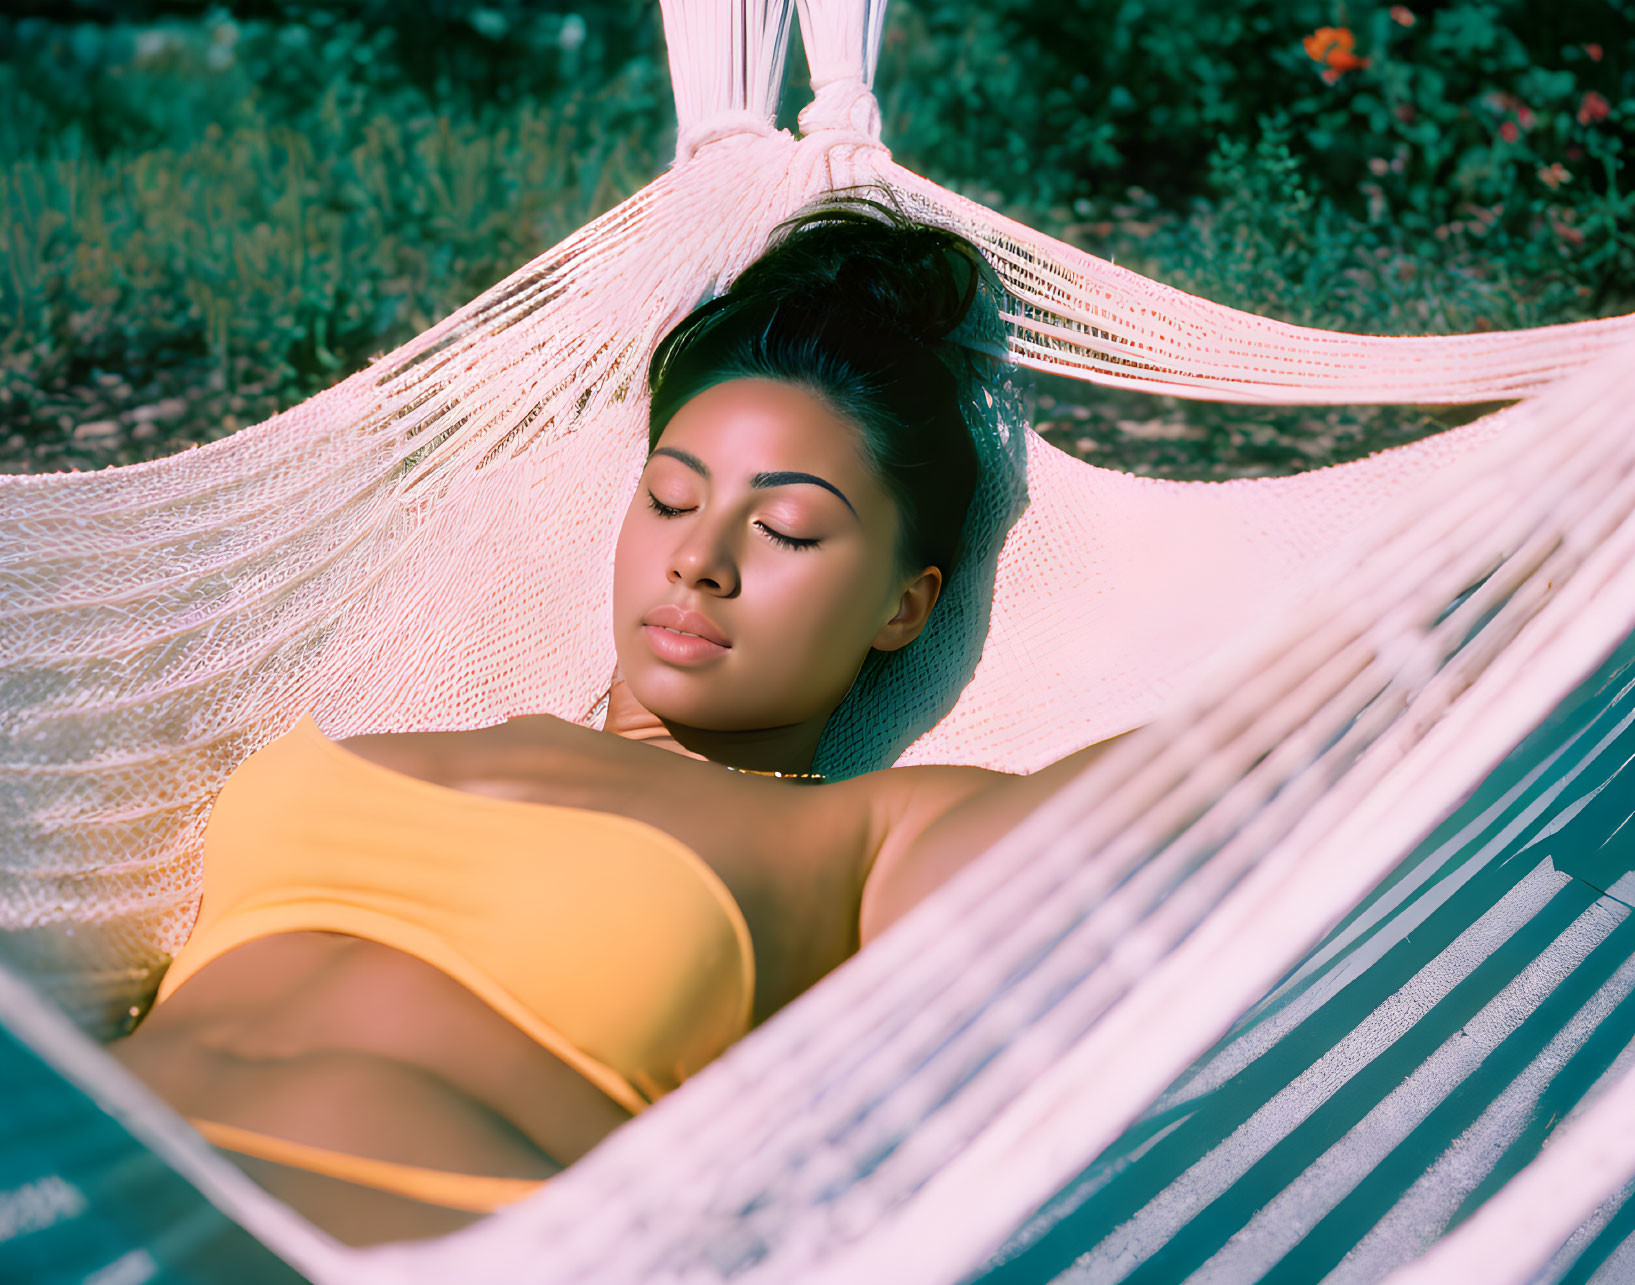 Woman in Yellow Top Relaxing in White Hammock Outdoors